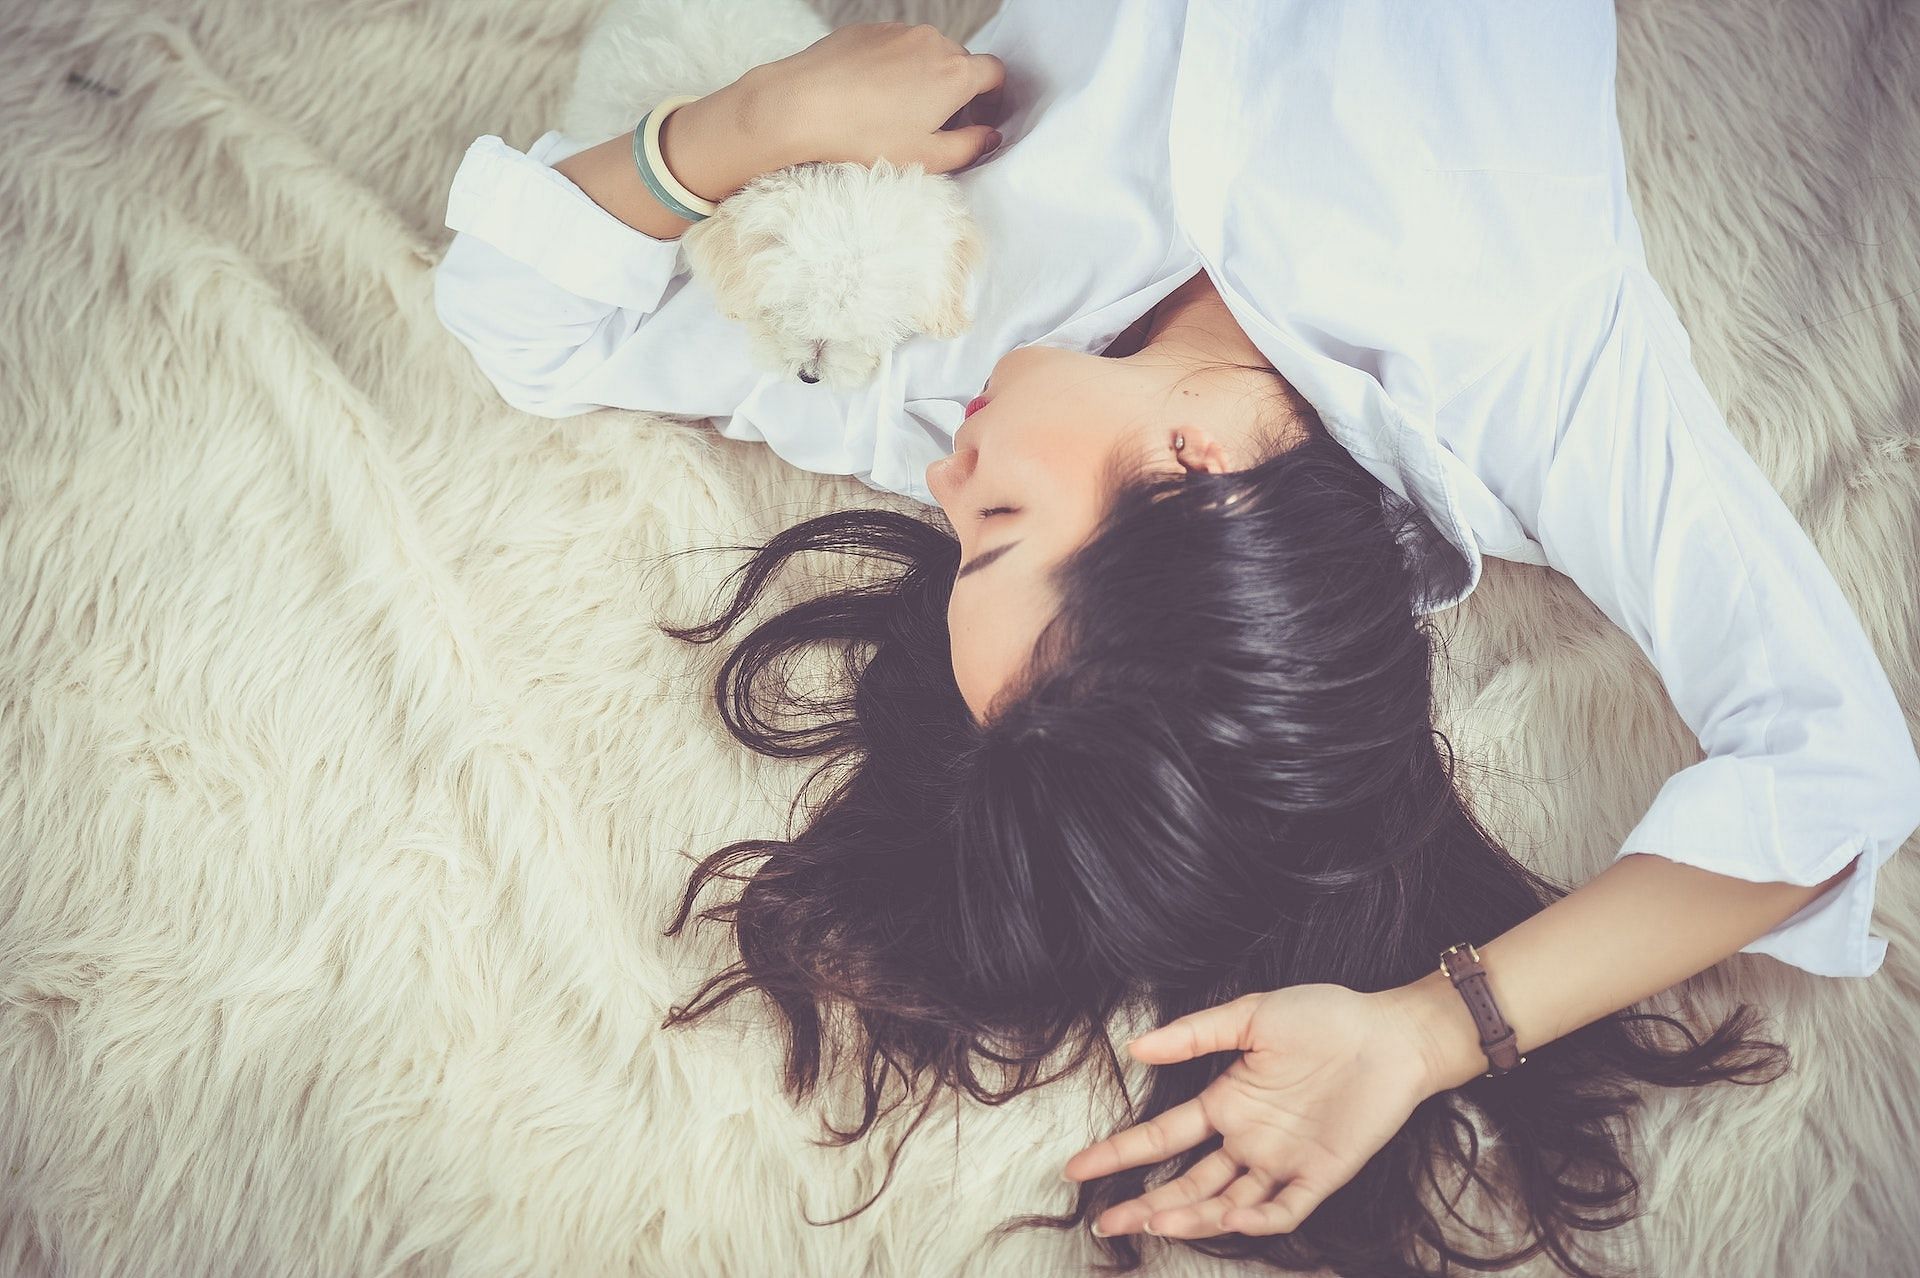 A good night&#039;s sleep is also important to keep under eye bags at bay. (Photo via Pexels/Pixabay)